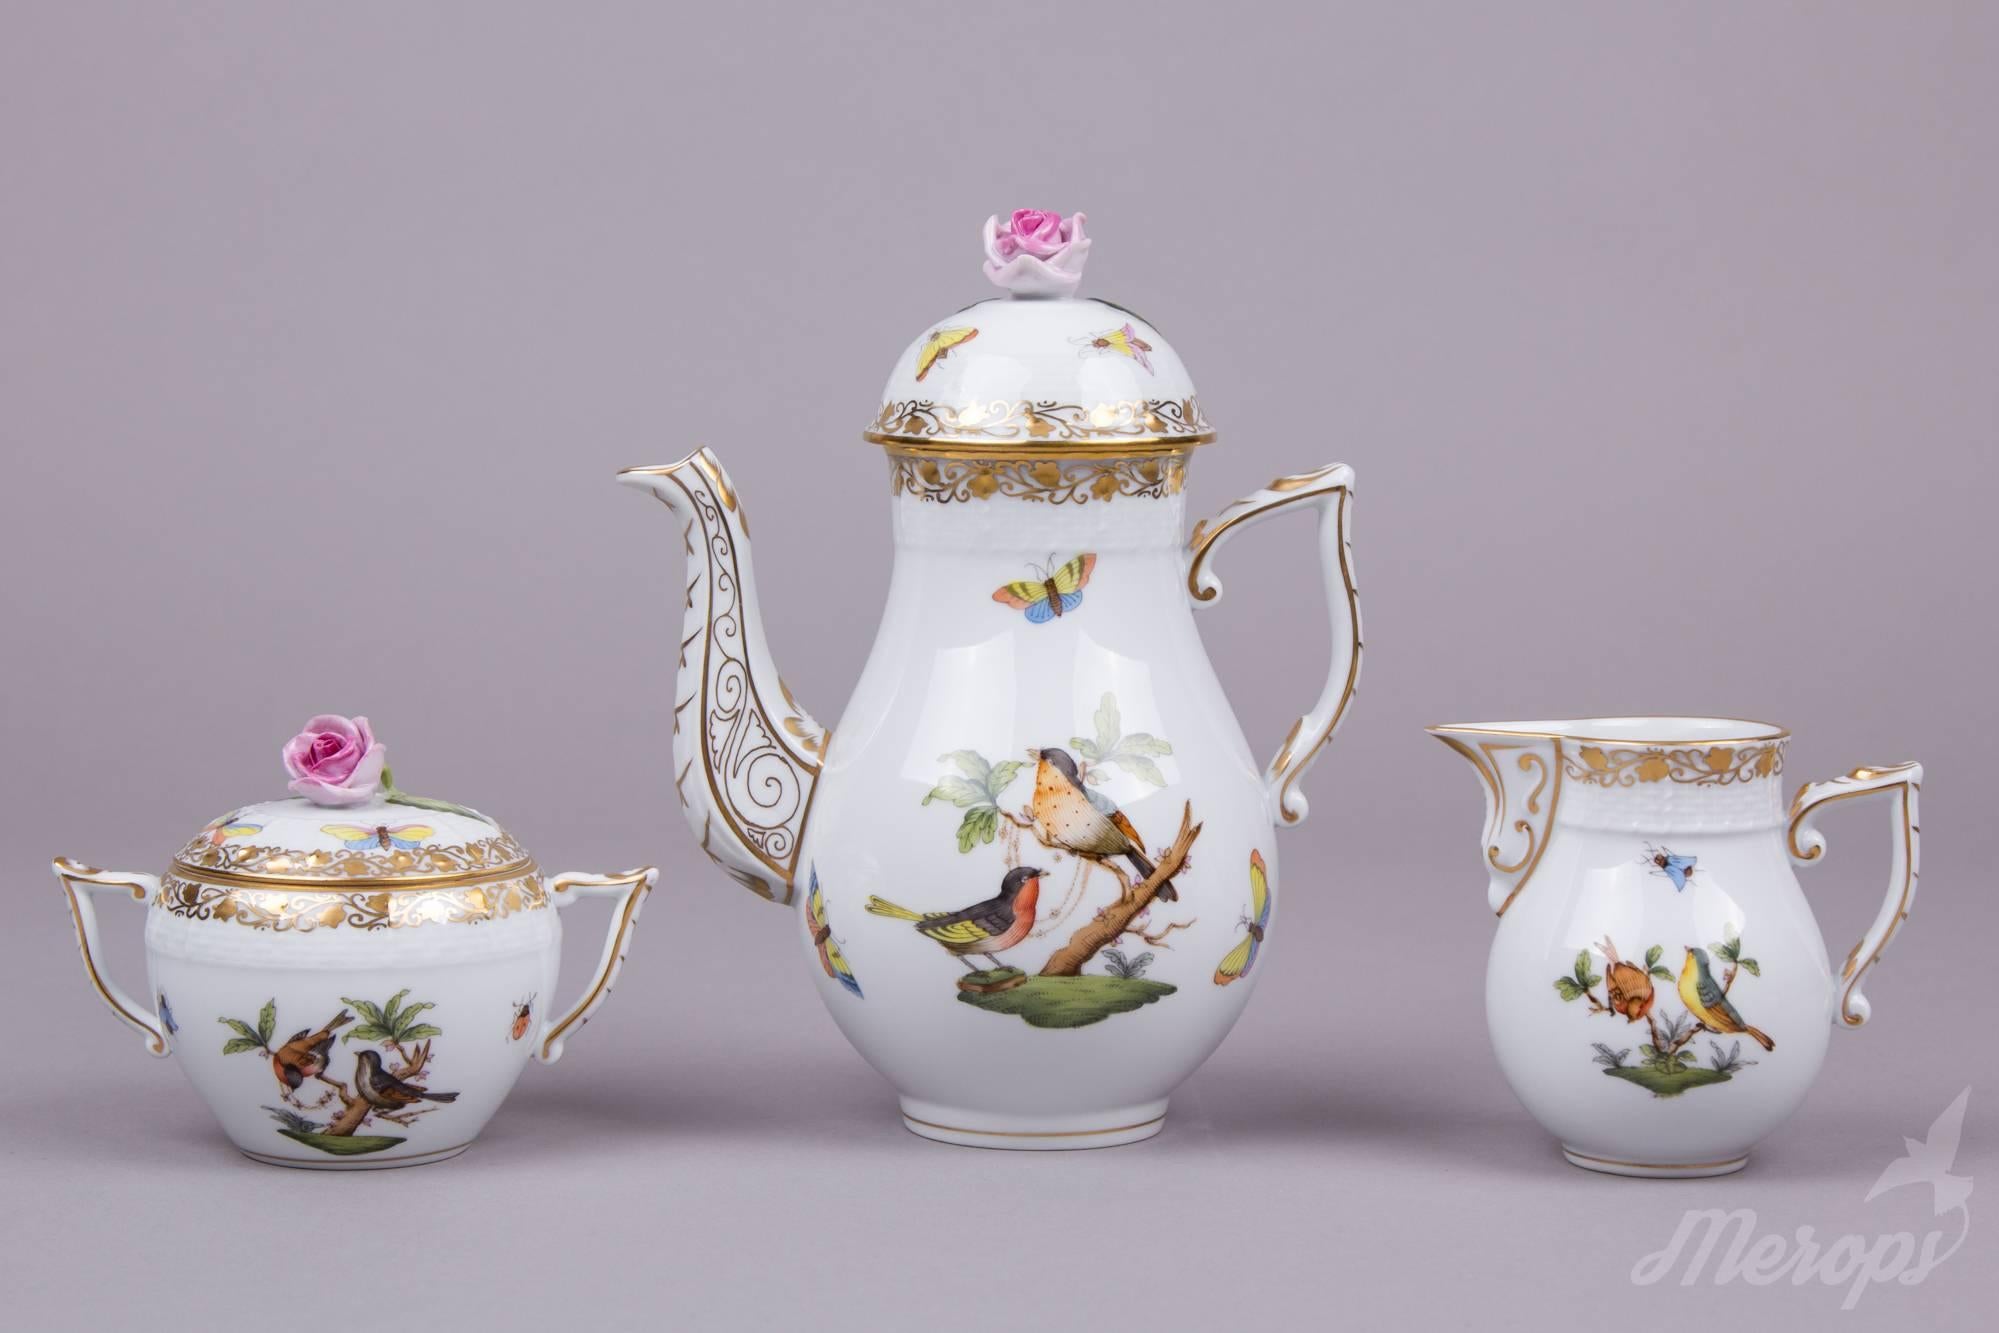 We ship this item worldwide for 70 USD with insurance. Shipping usually takes 3-7 business days. Express shipping with FedEx (2 days) available for 150 USD. Manufacturer: Herend Porcelain Manufactory (Hungary) Quality: Hand-painted, 1st class